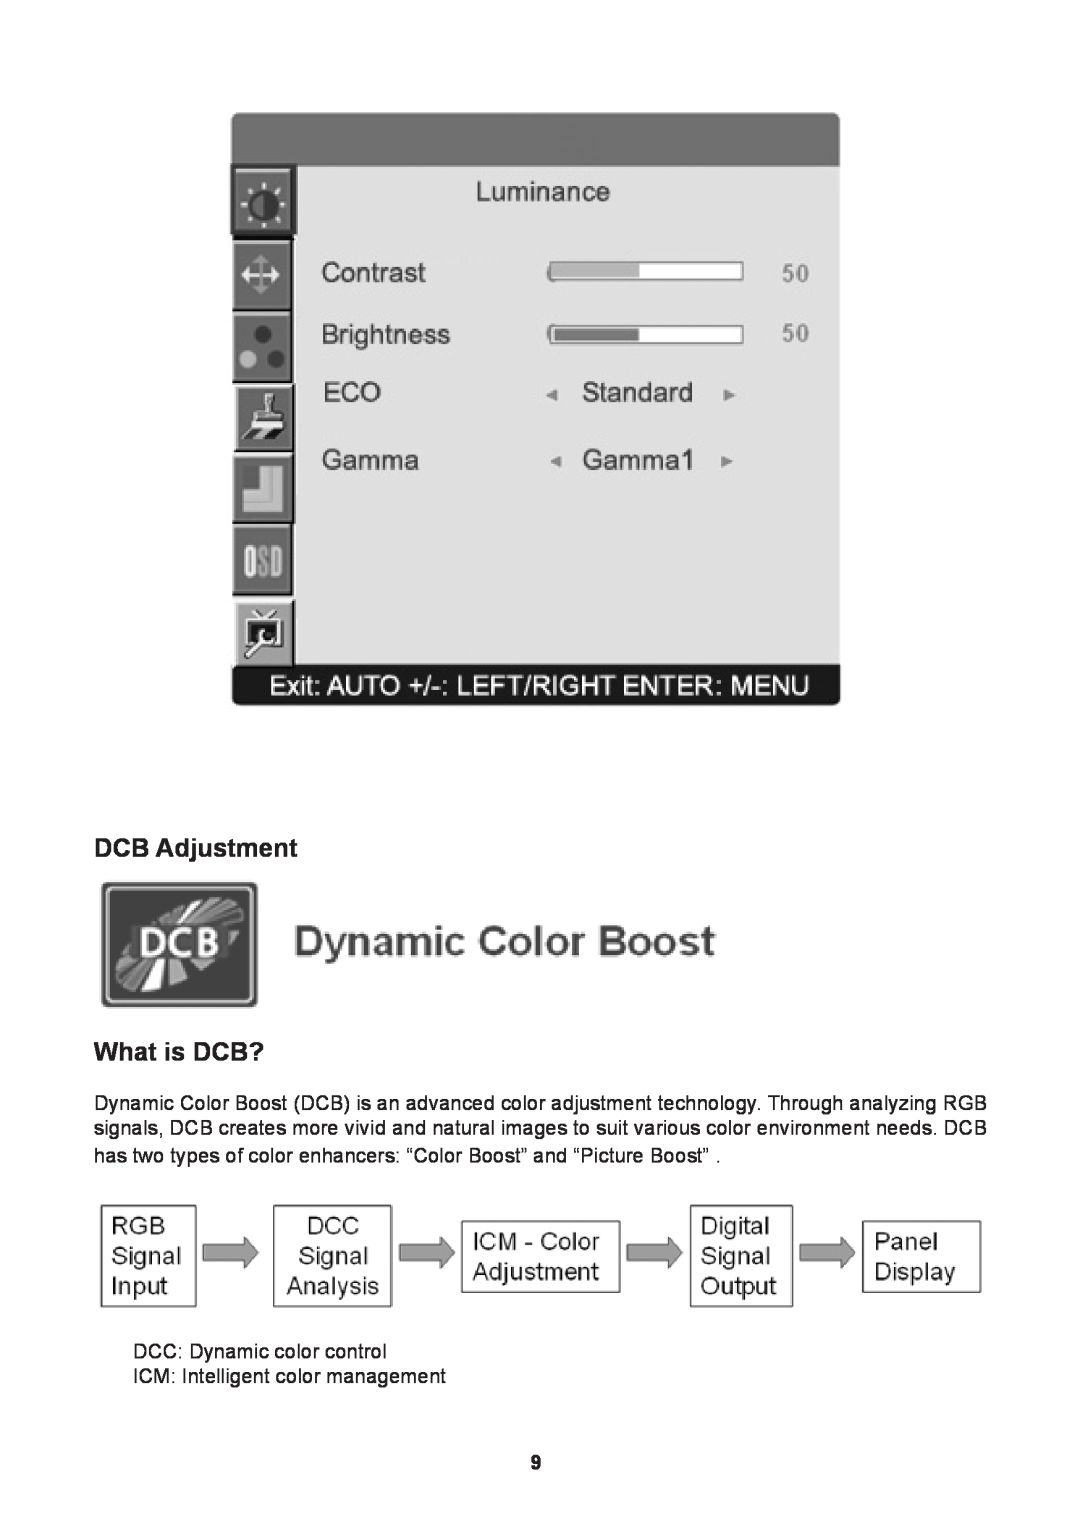 Lenovo D1960 manual DCB Adjustment What is DCB?, has two types of color enhancers “Color Boost” and “Picture Boost” 